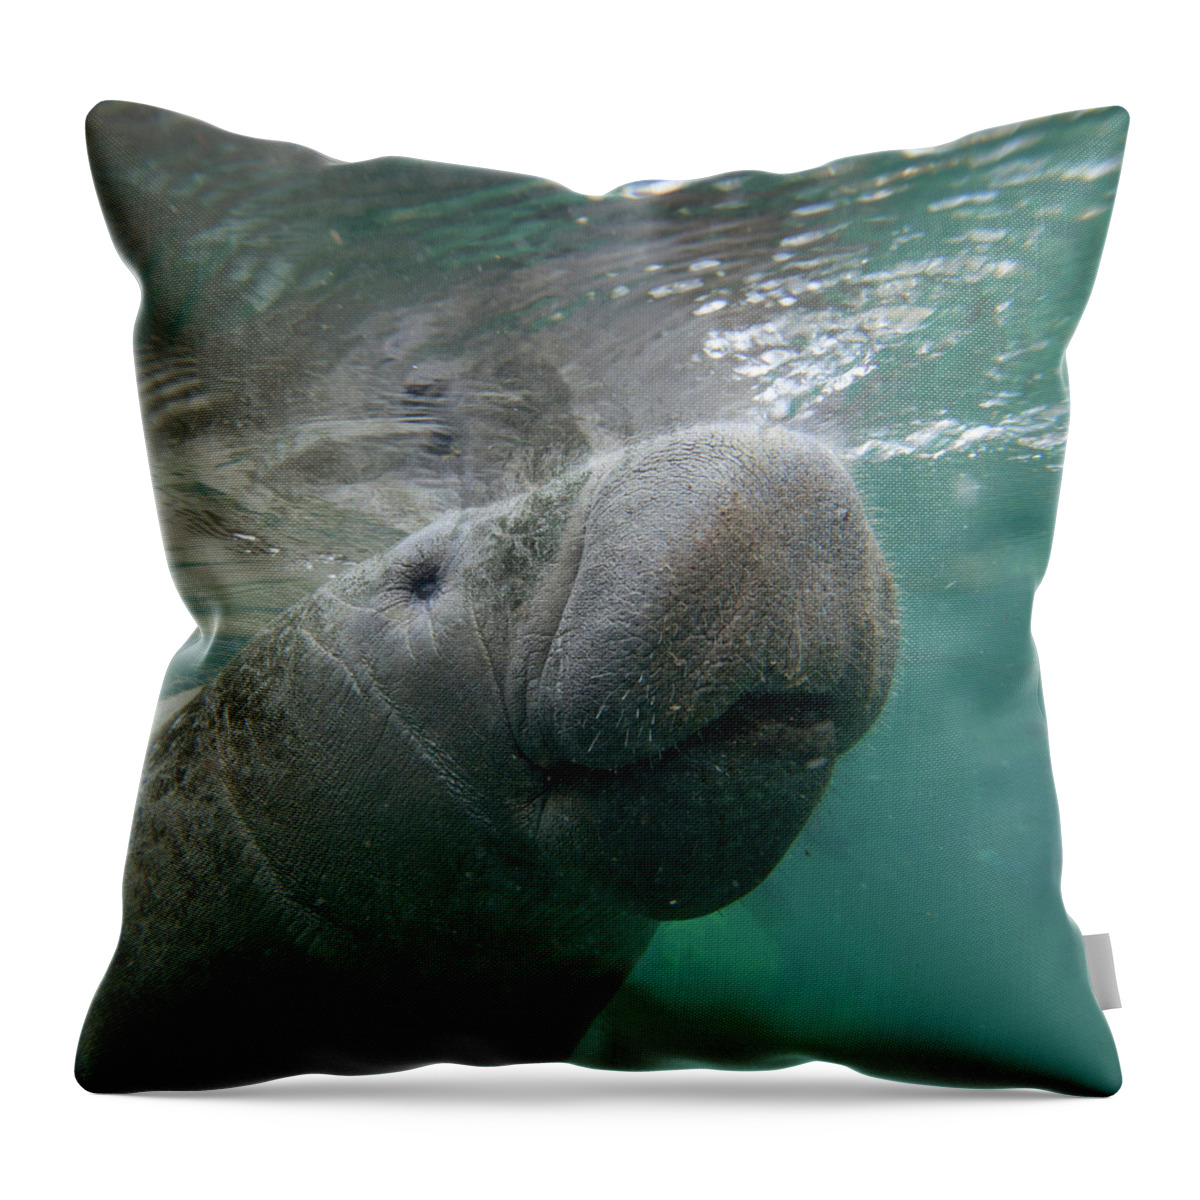 00544878 Throw Pillow featuring the photograph West Indiamanatee, Crystal River, Florida #1 by Tim Fitzharris